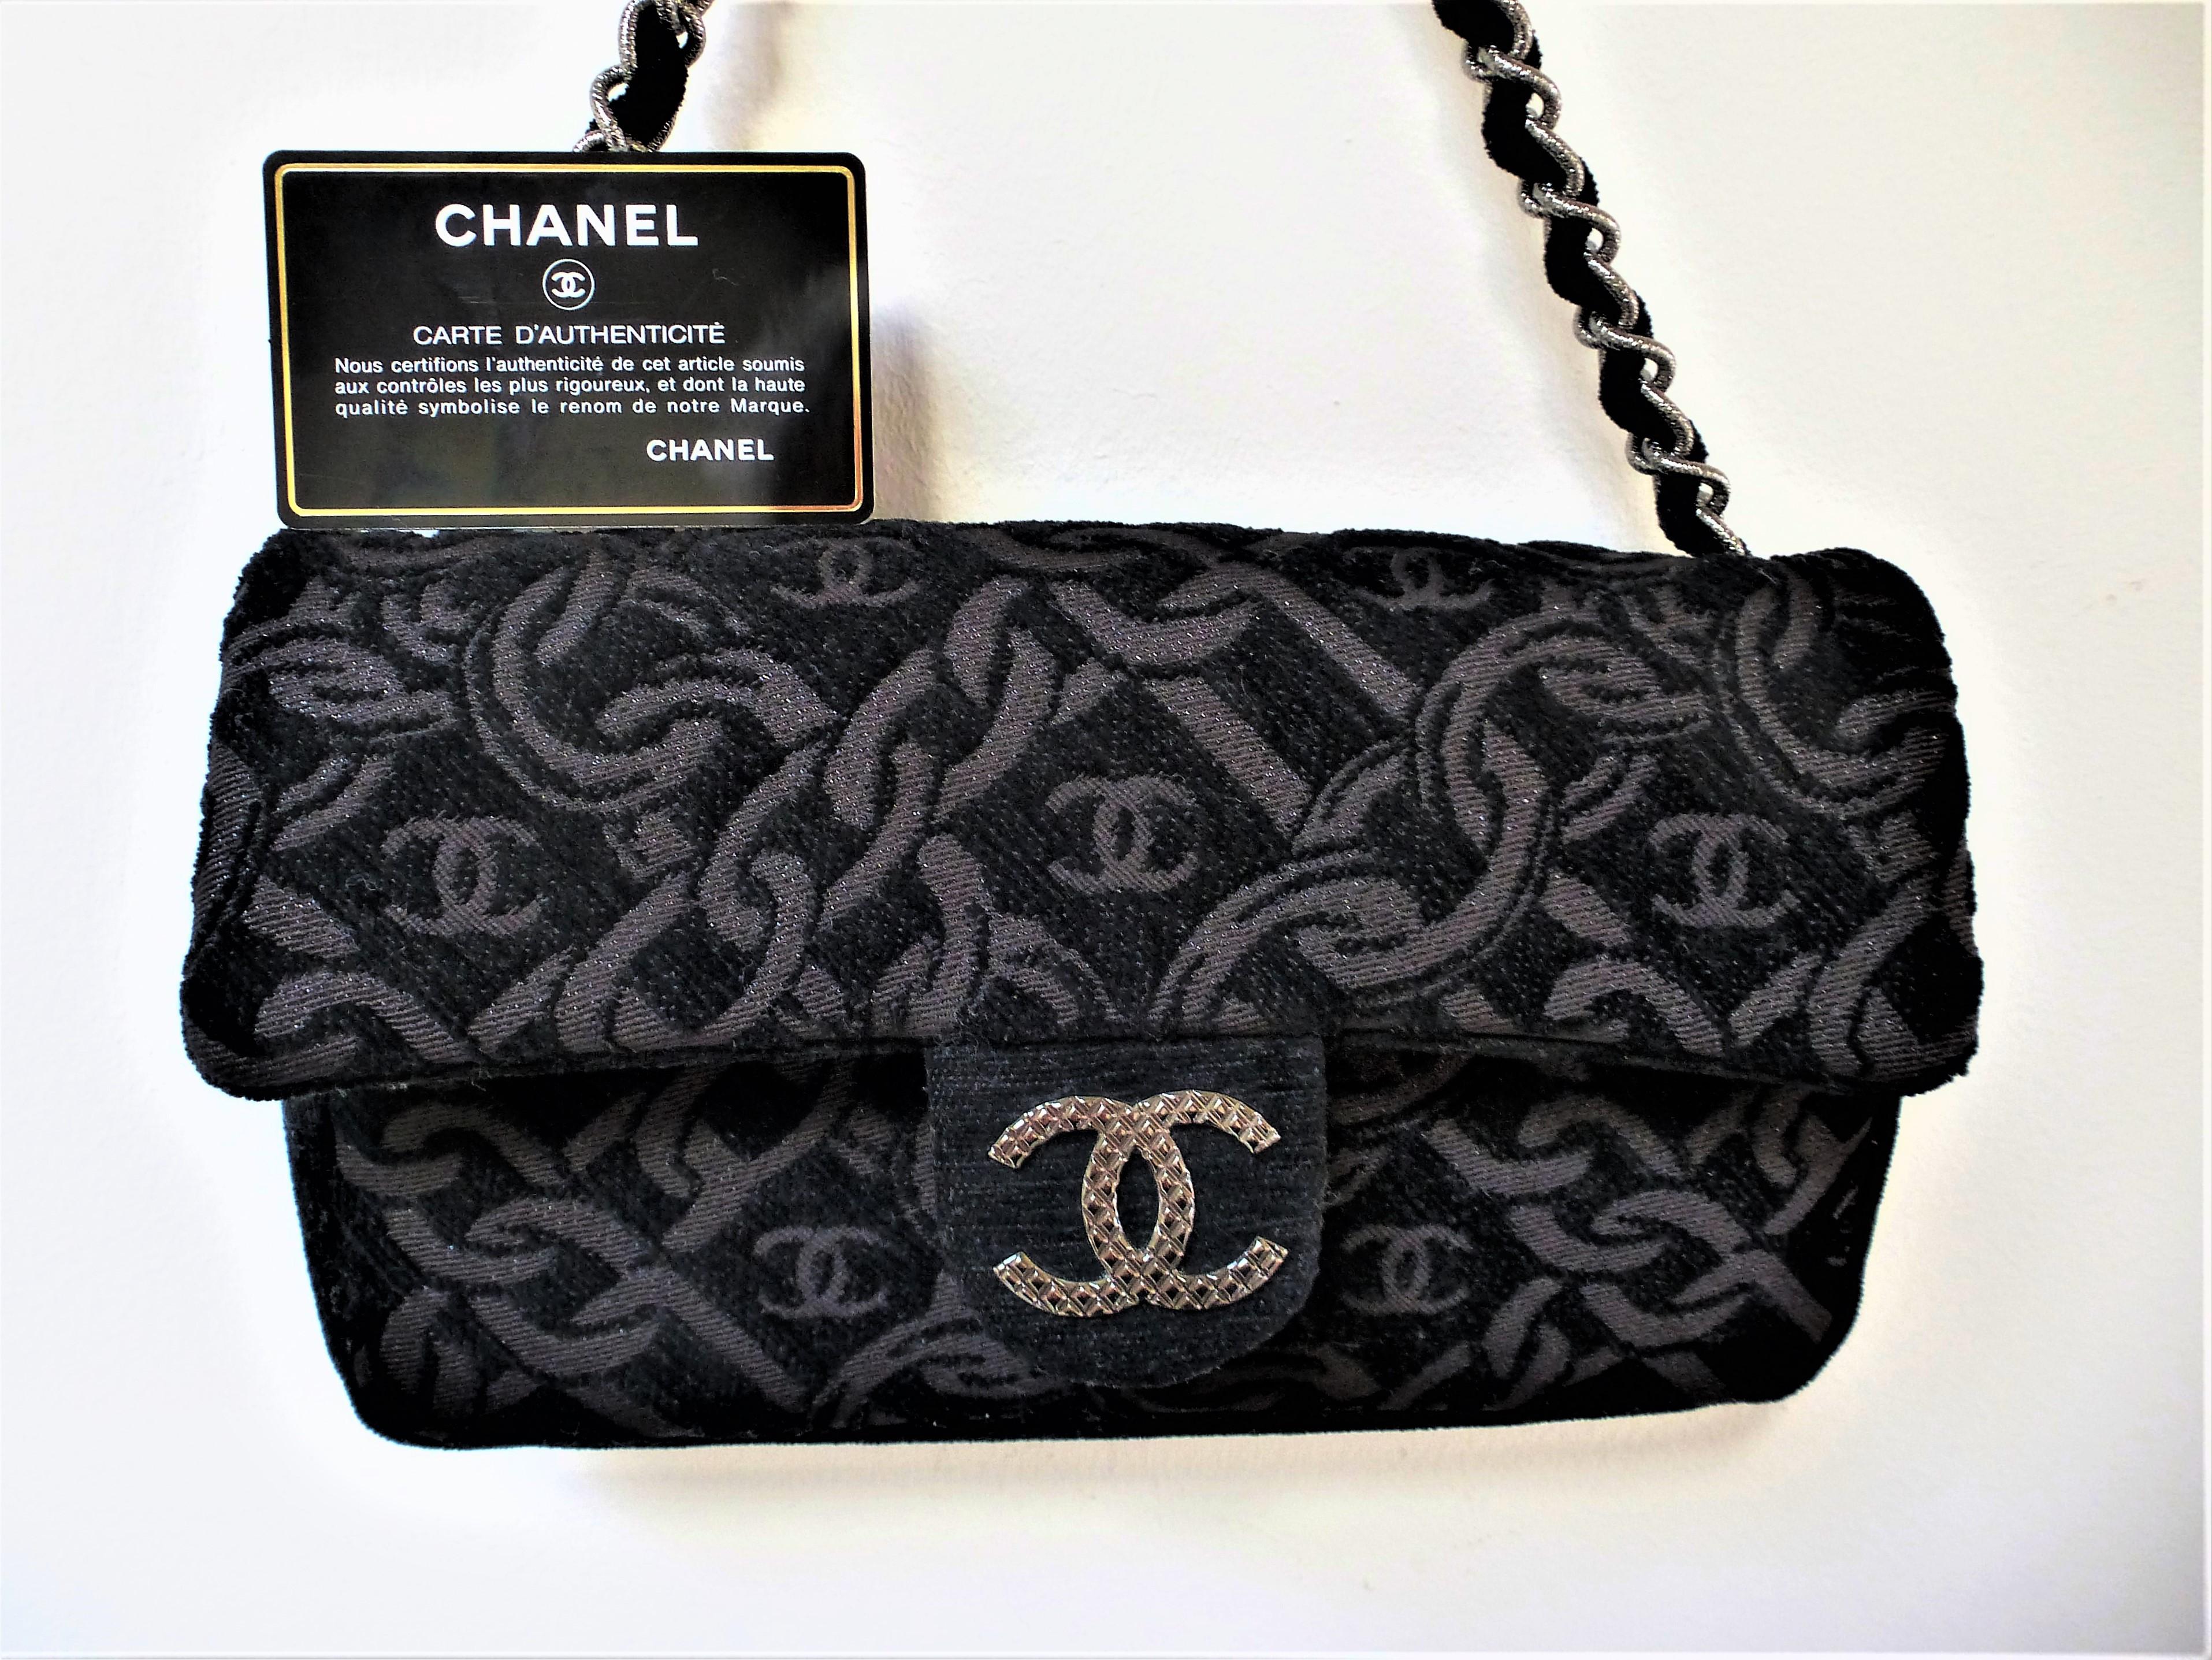 Women's Chanel evening bag made of black jacquard fabric, woven Chanel chain and logo! For Sale